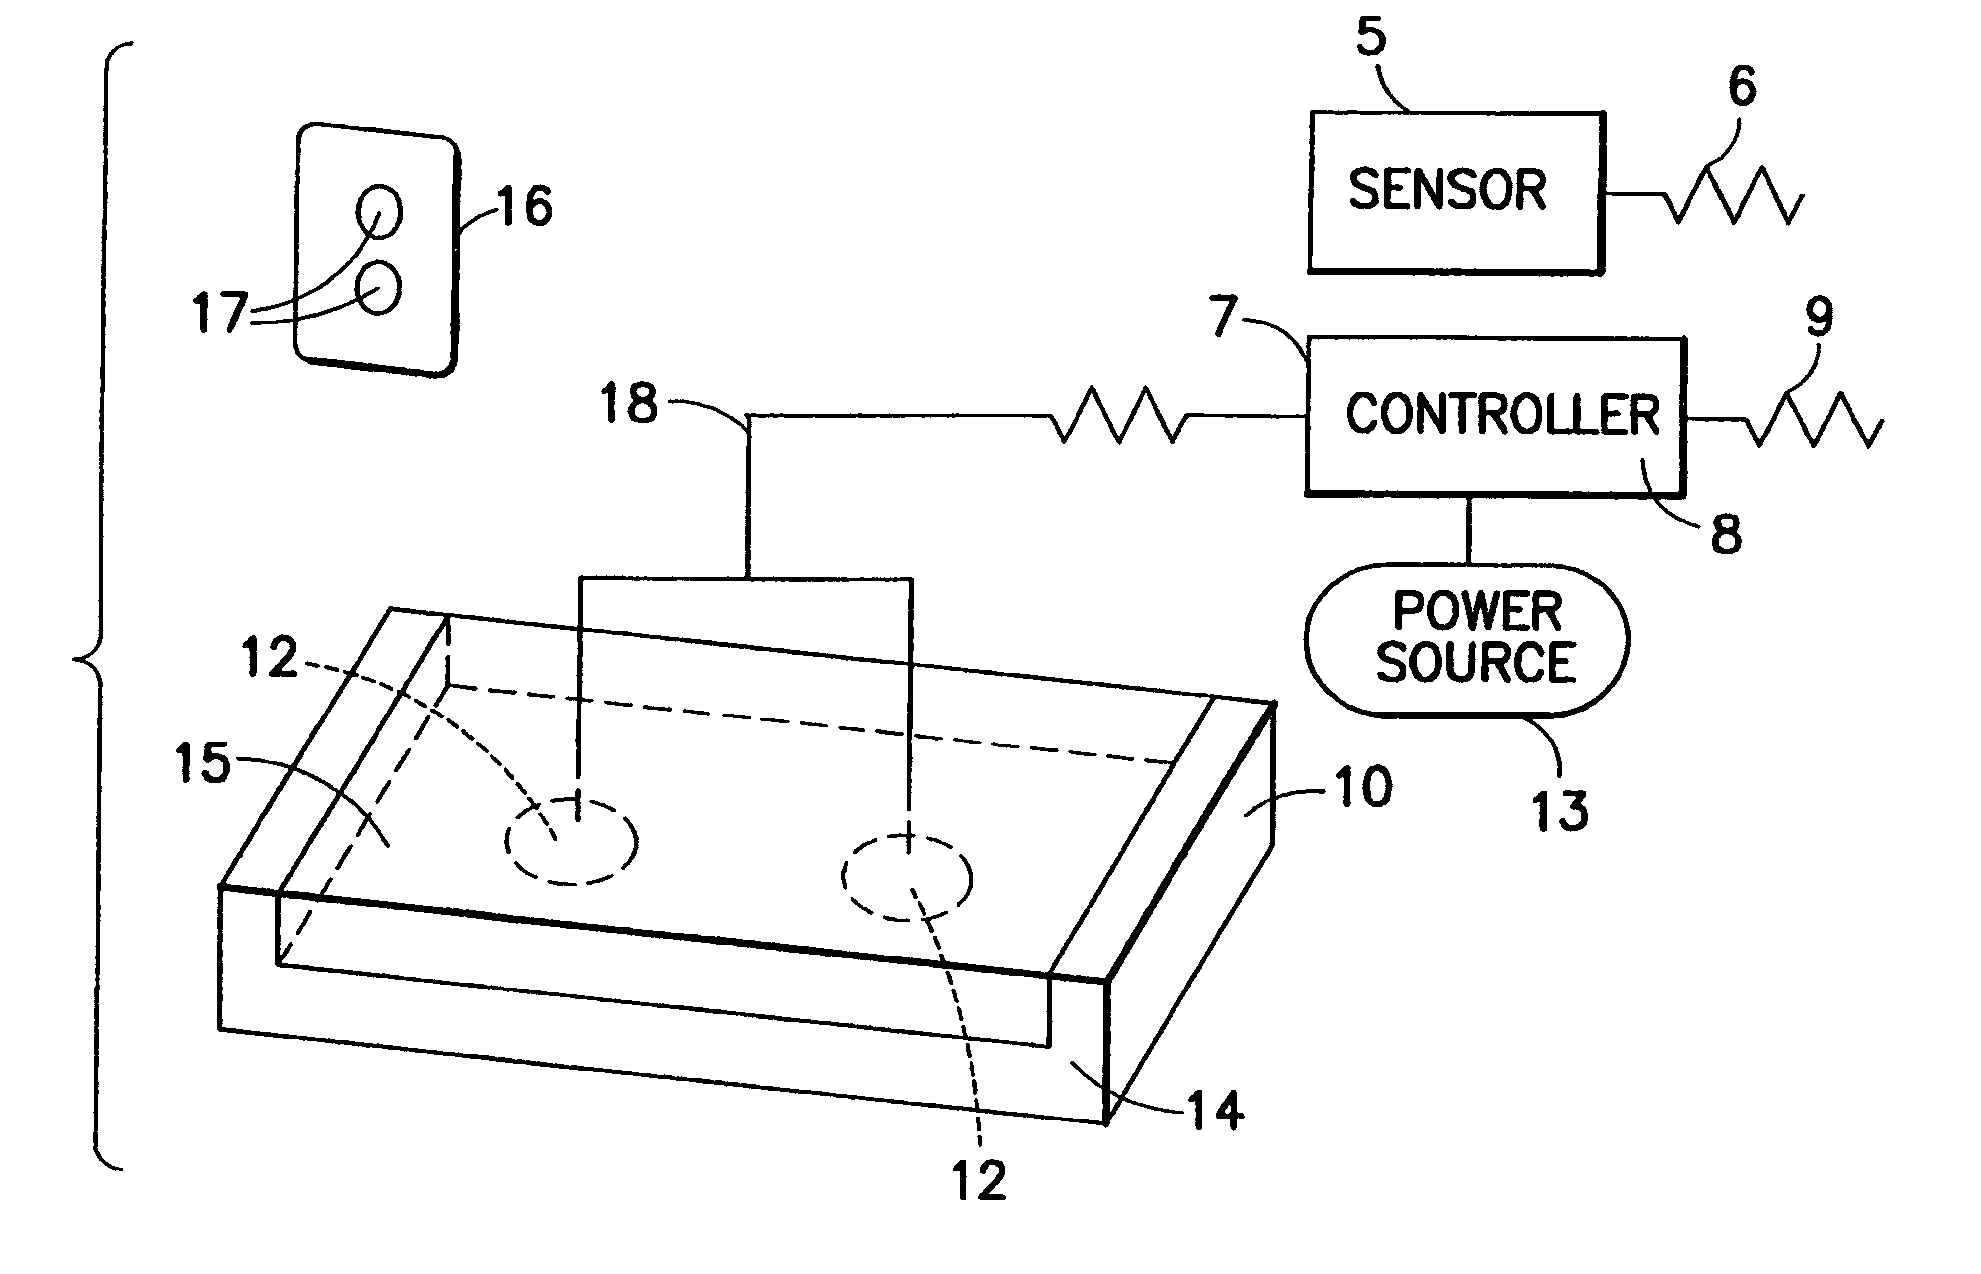 Apparatus and method for selectively transmitting vibrations to an individual situated on a support surface